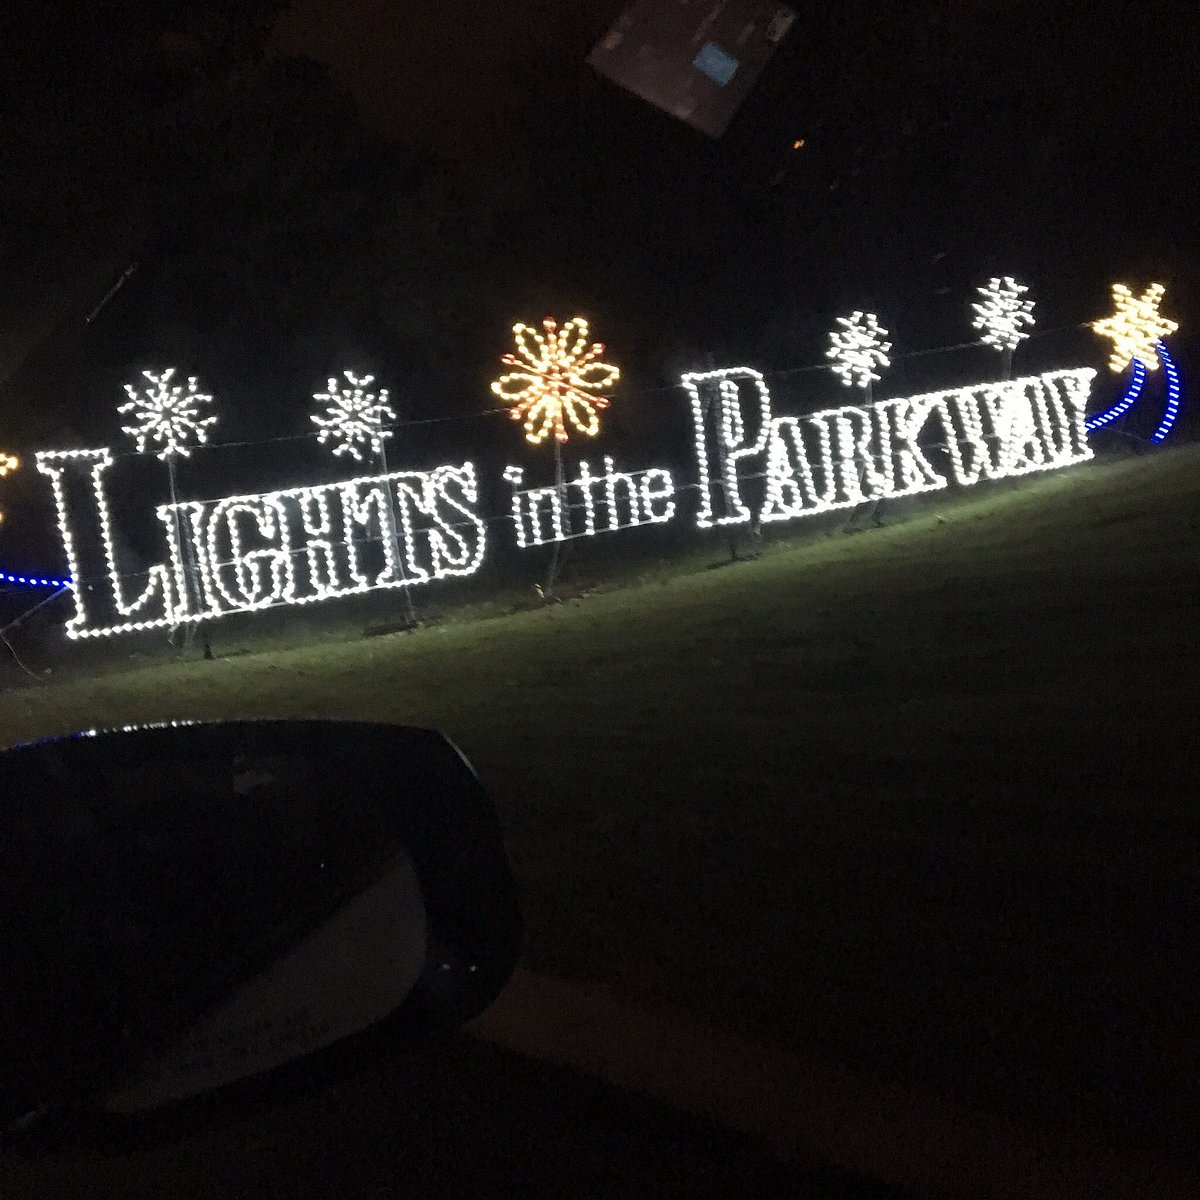 Lights in the Parkway (Allentown) All You Need to Know